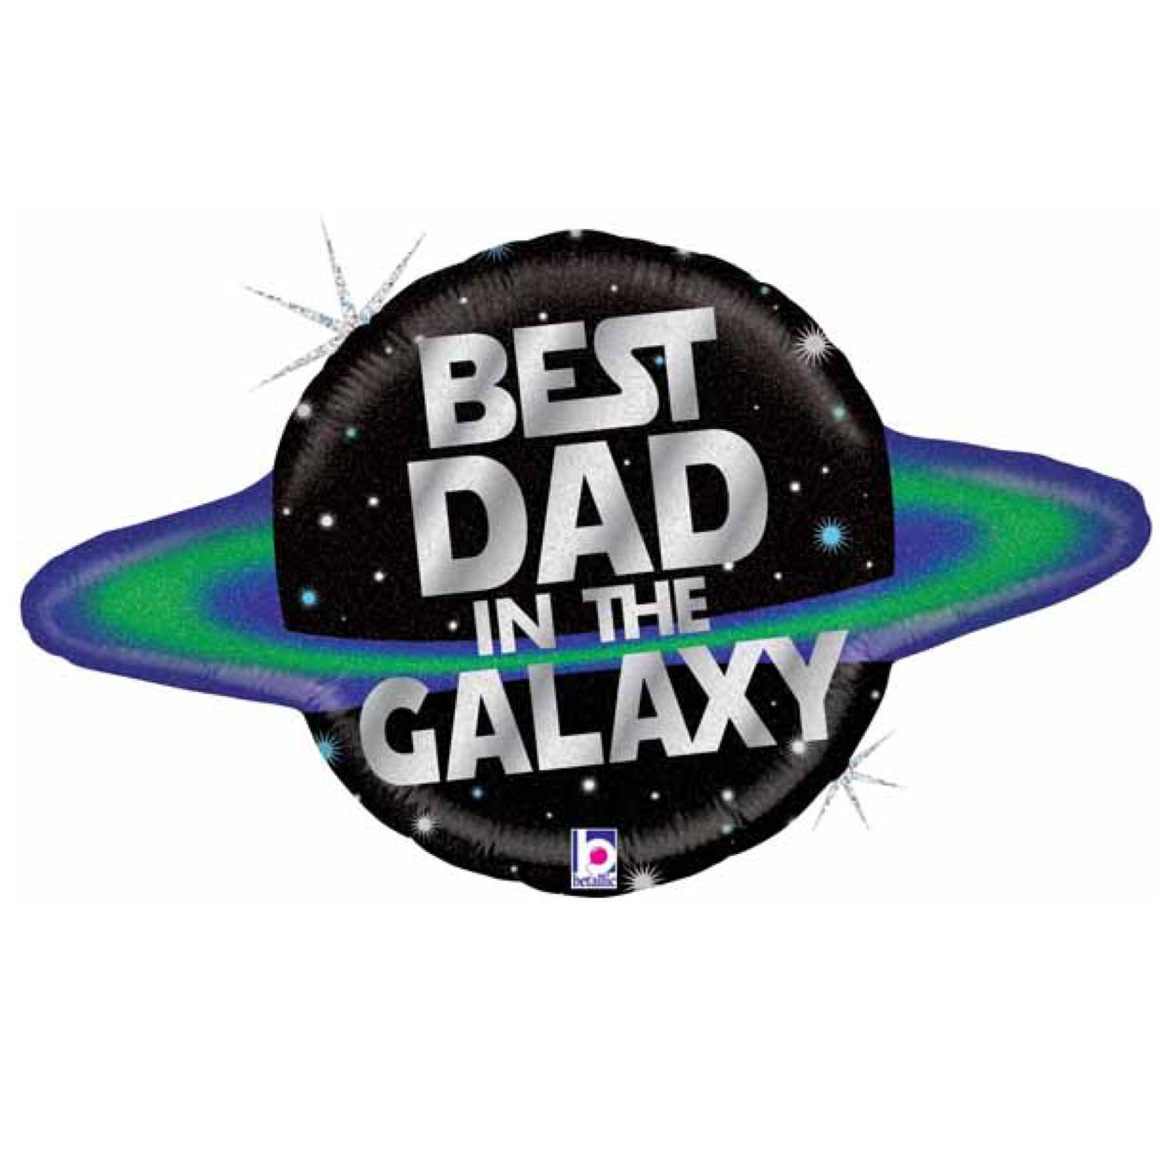 BALLOONS - GALACTIC DAD HOLOGRAPHIC